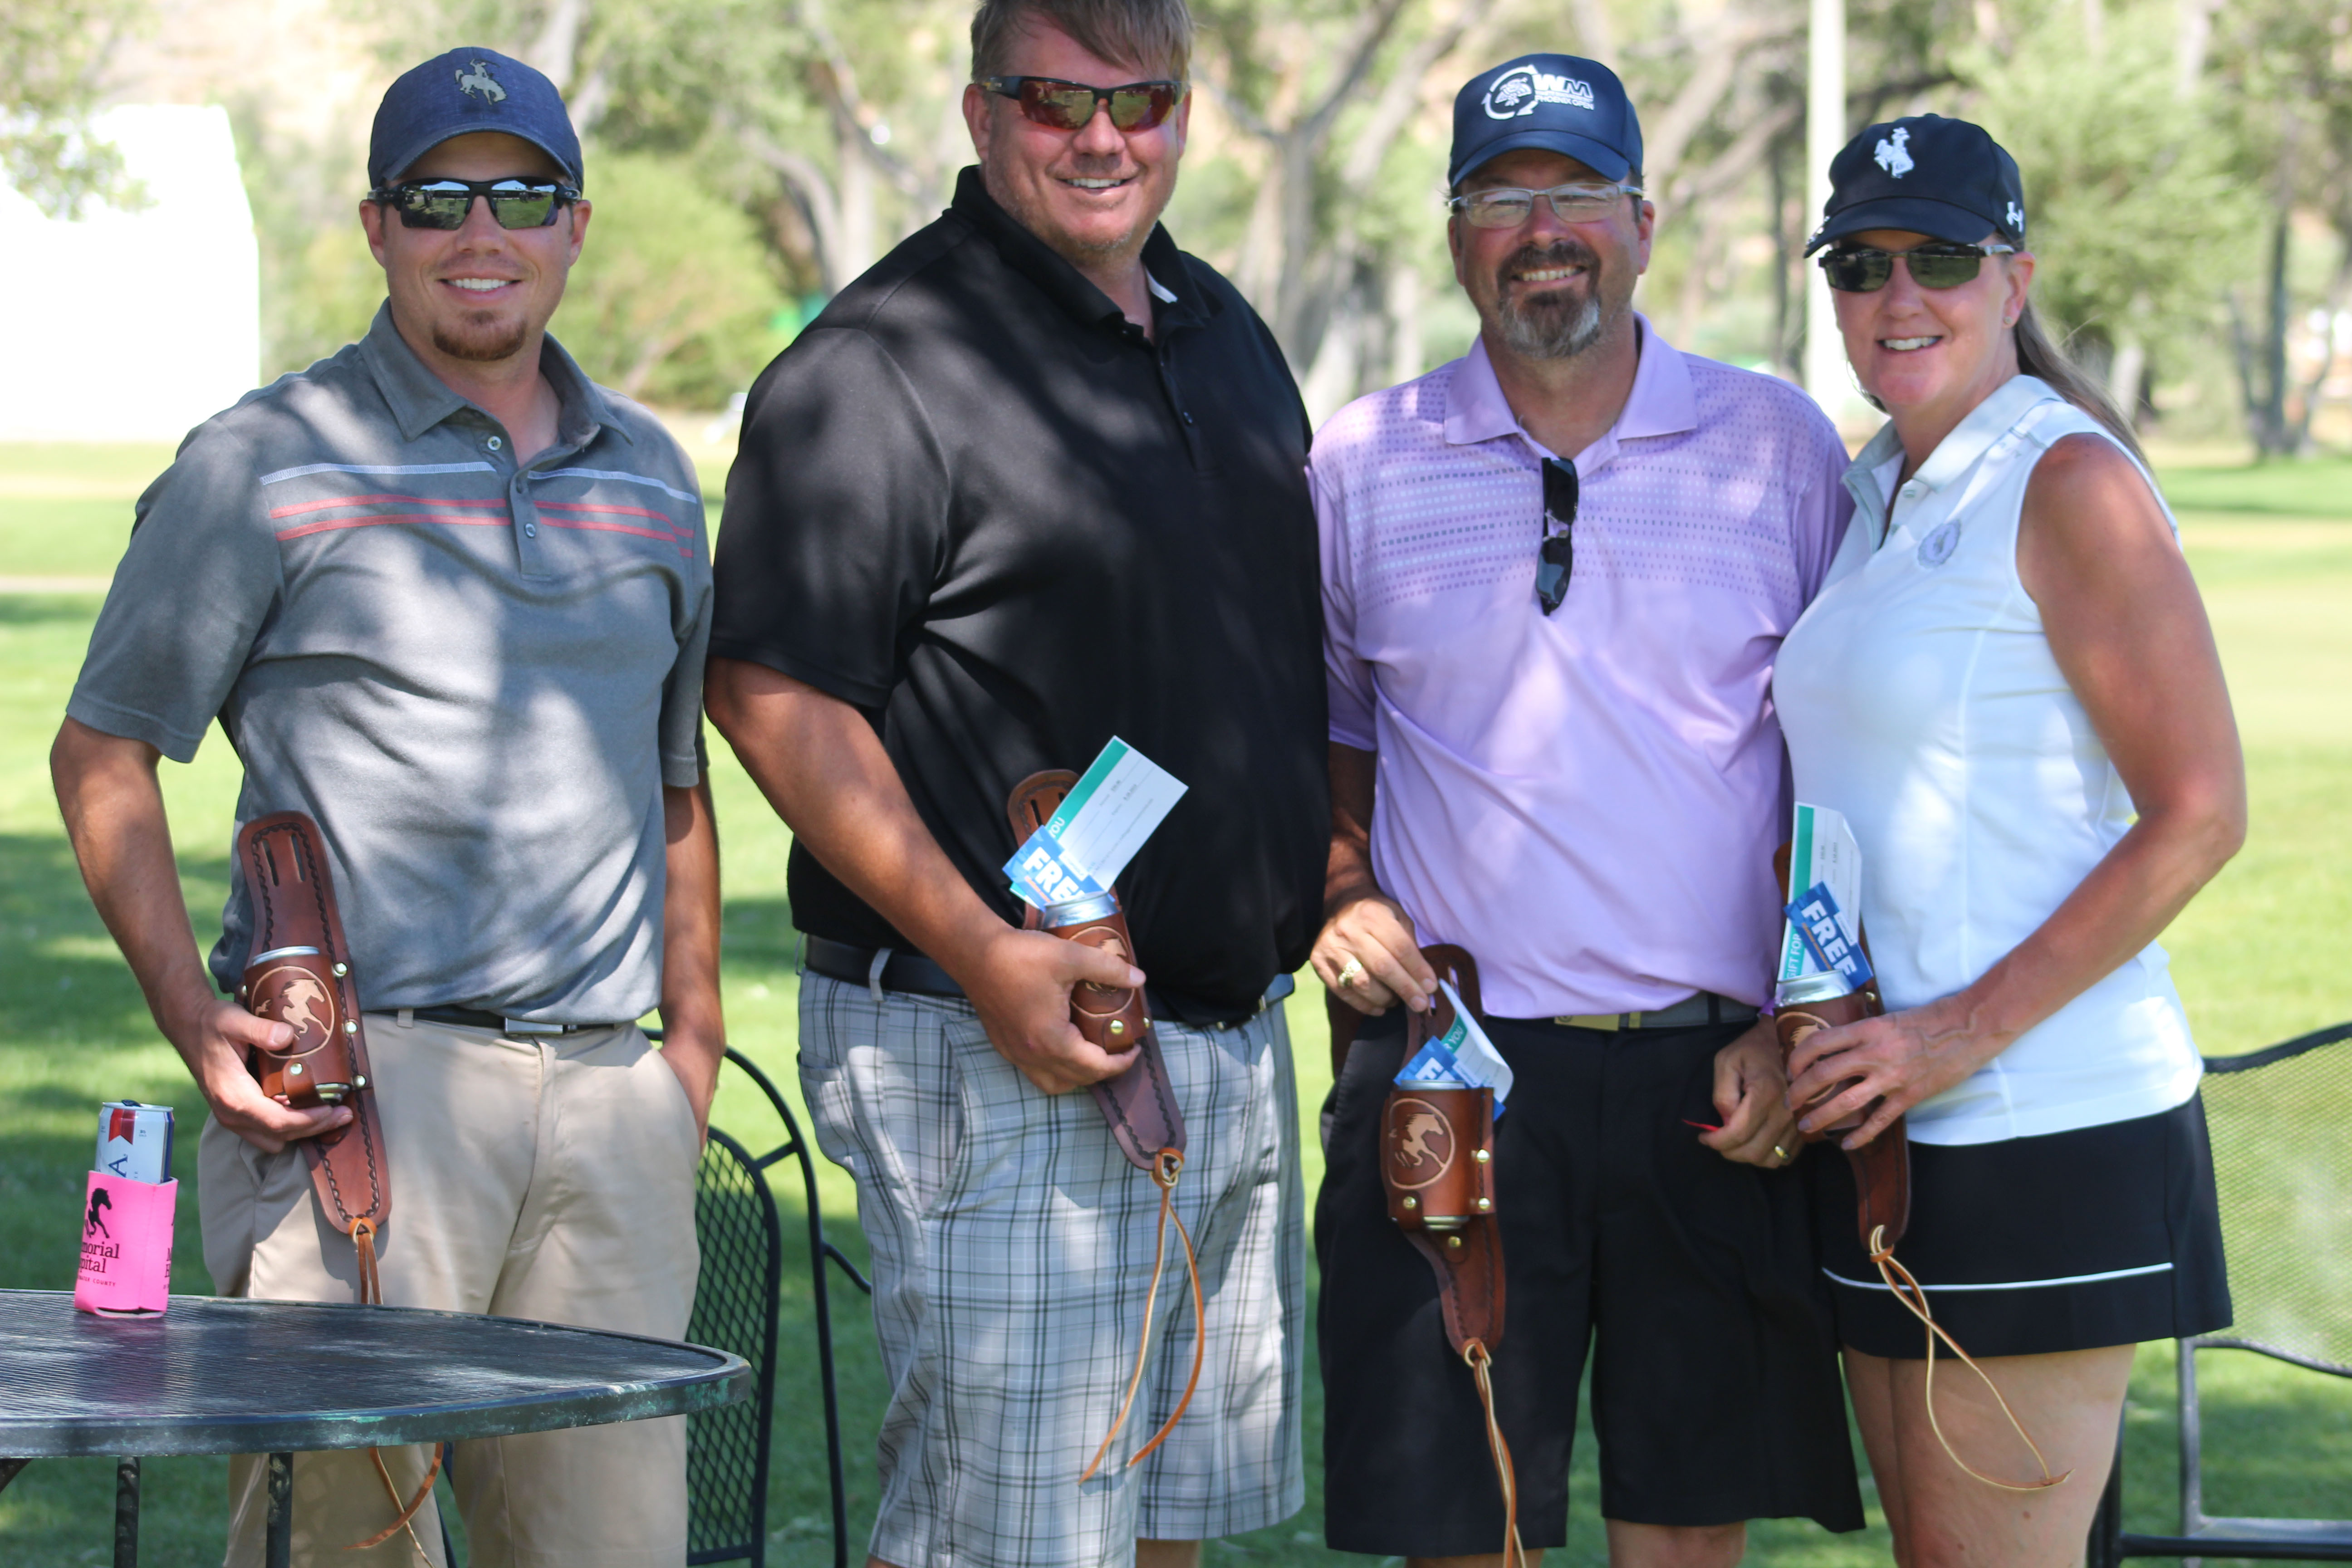 One of the 2019 Golf Classic winning teams